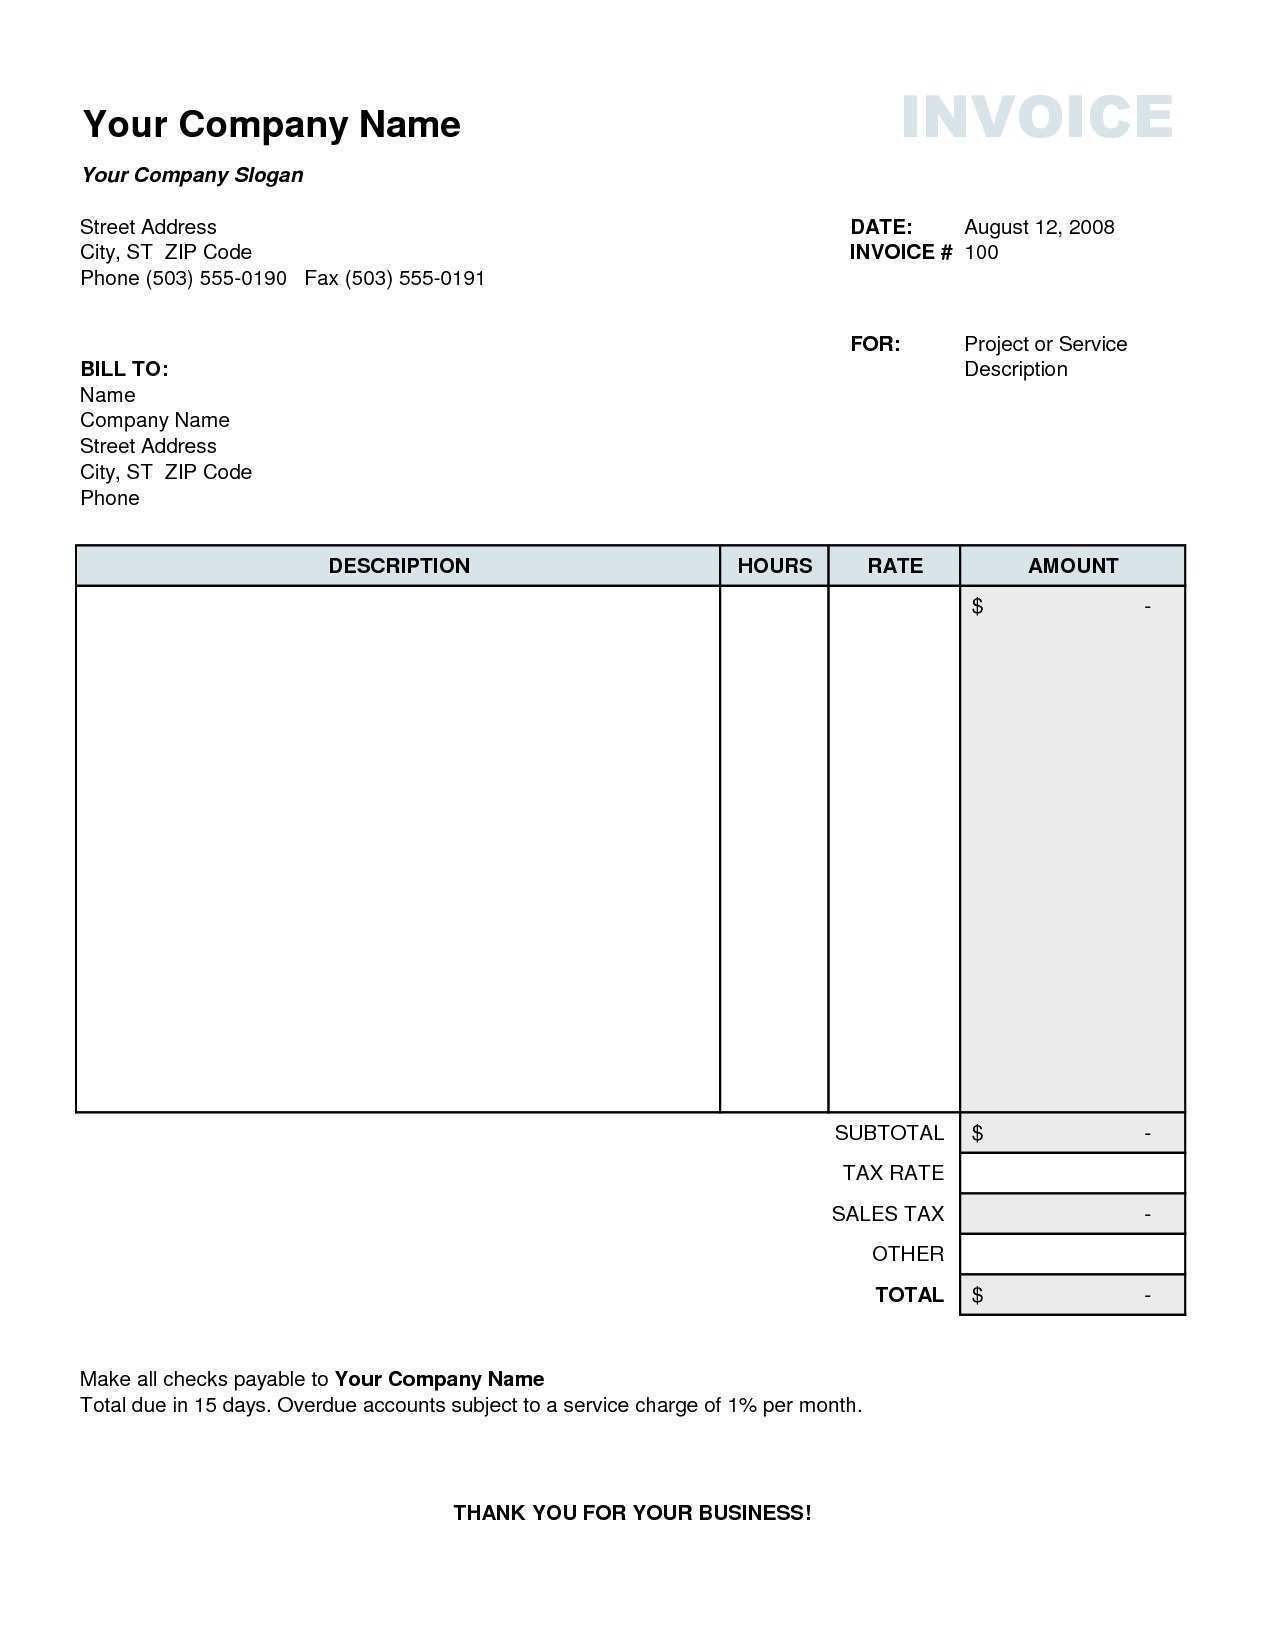 tax-invoice-example-south-africa-cards-design-templates